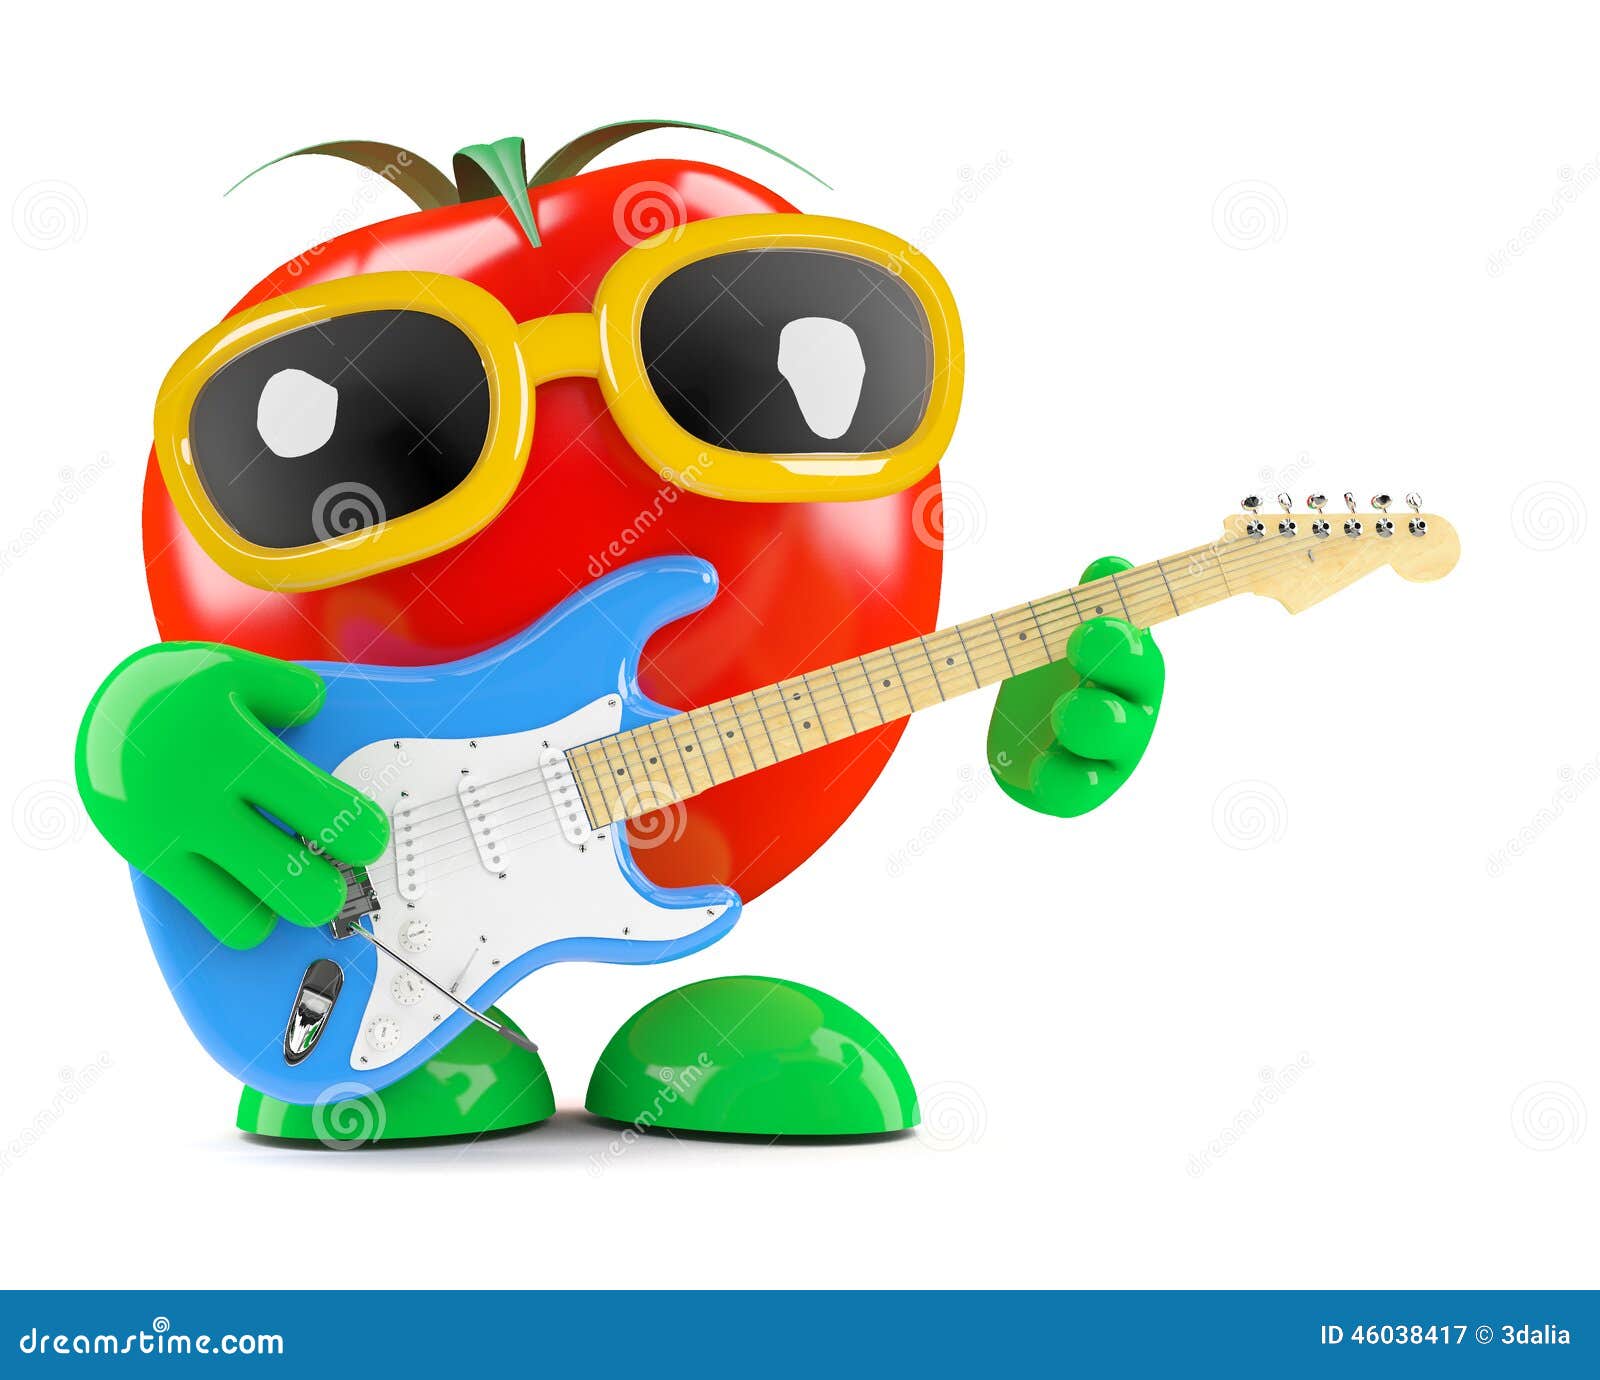 https://thumbs.dreamstime.com/z/d-tomato-plays-electric-guitar-render-playing-46038417.jpg